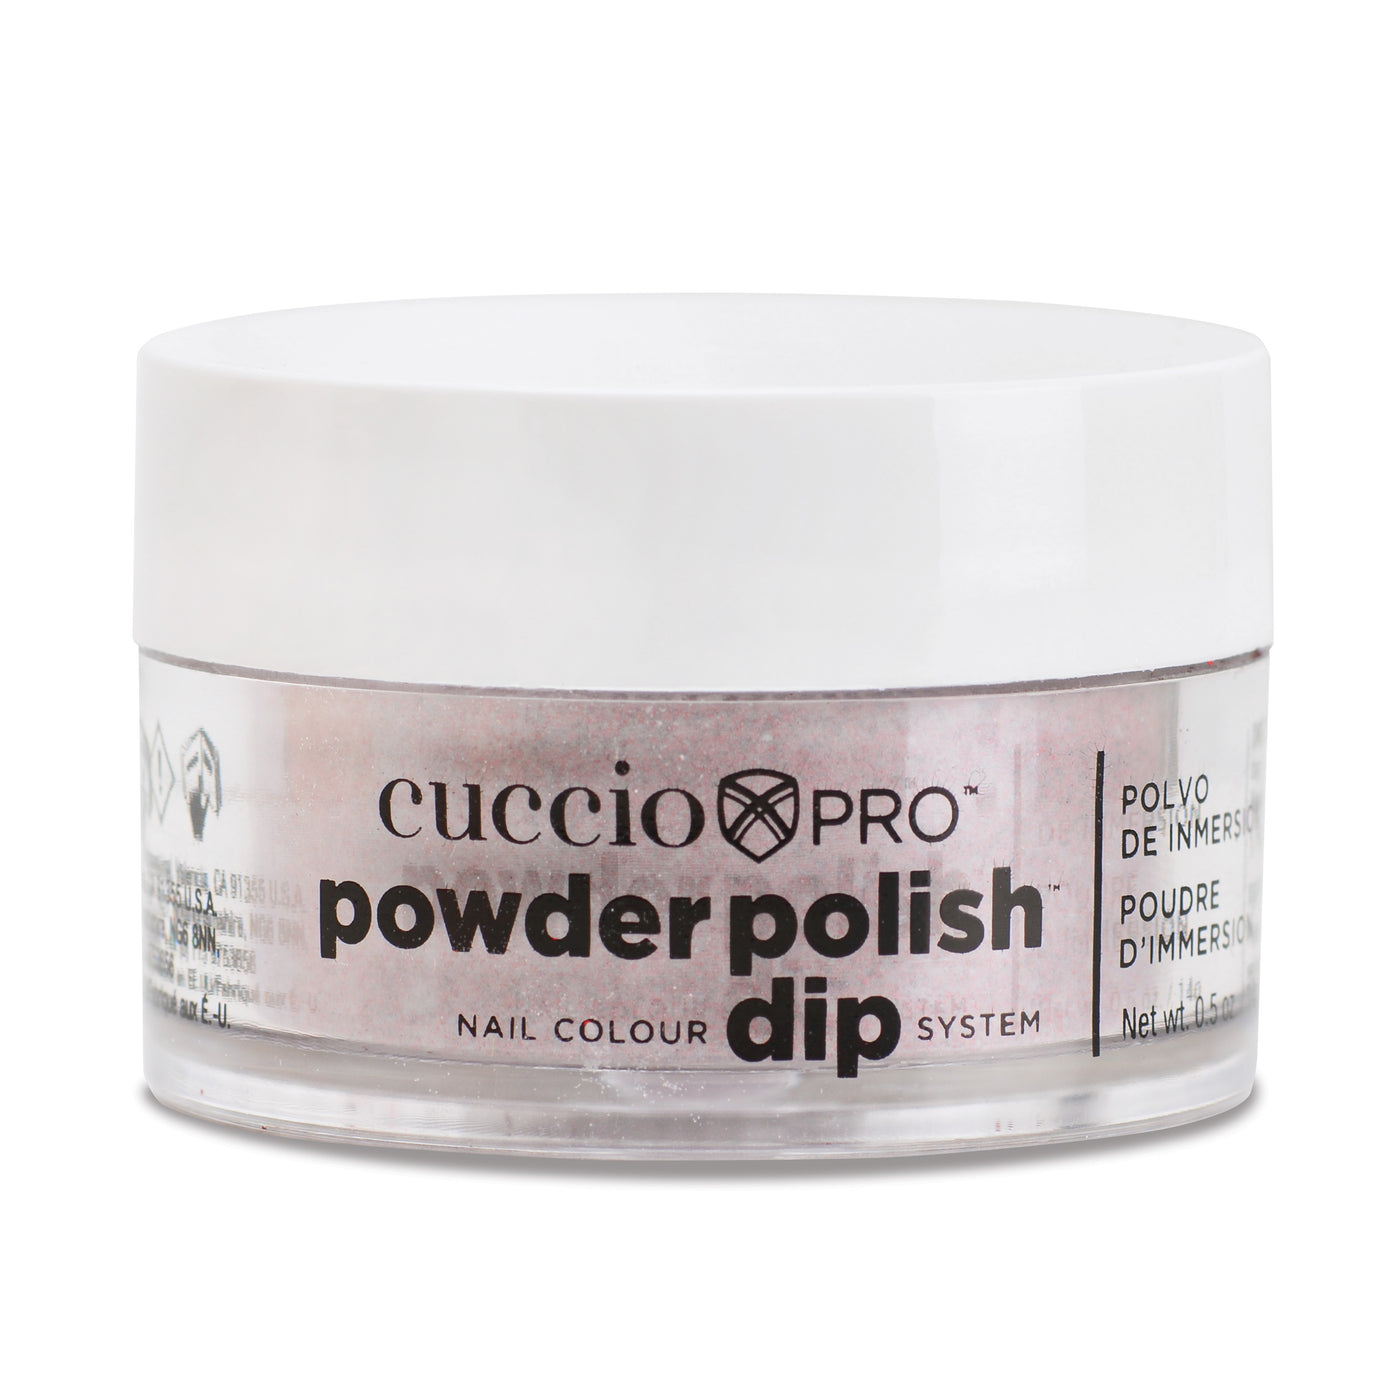 CP Dipping Powder14g - 5531-5 Ruby Red Glitter